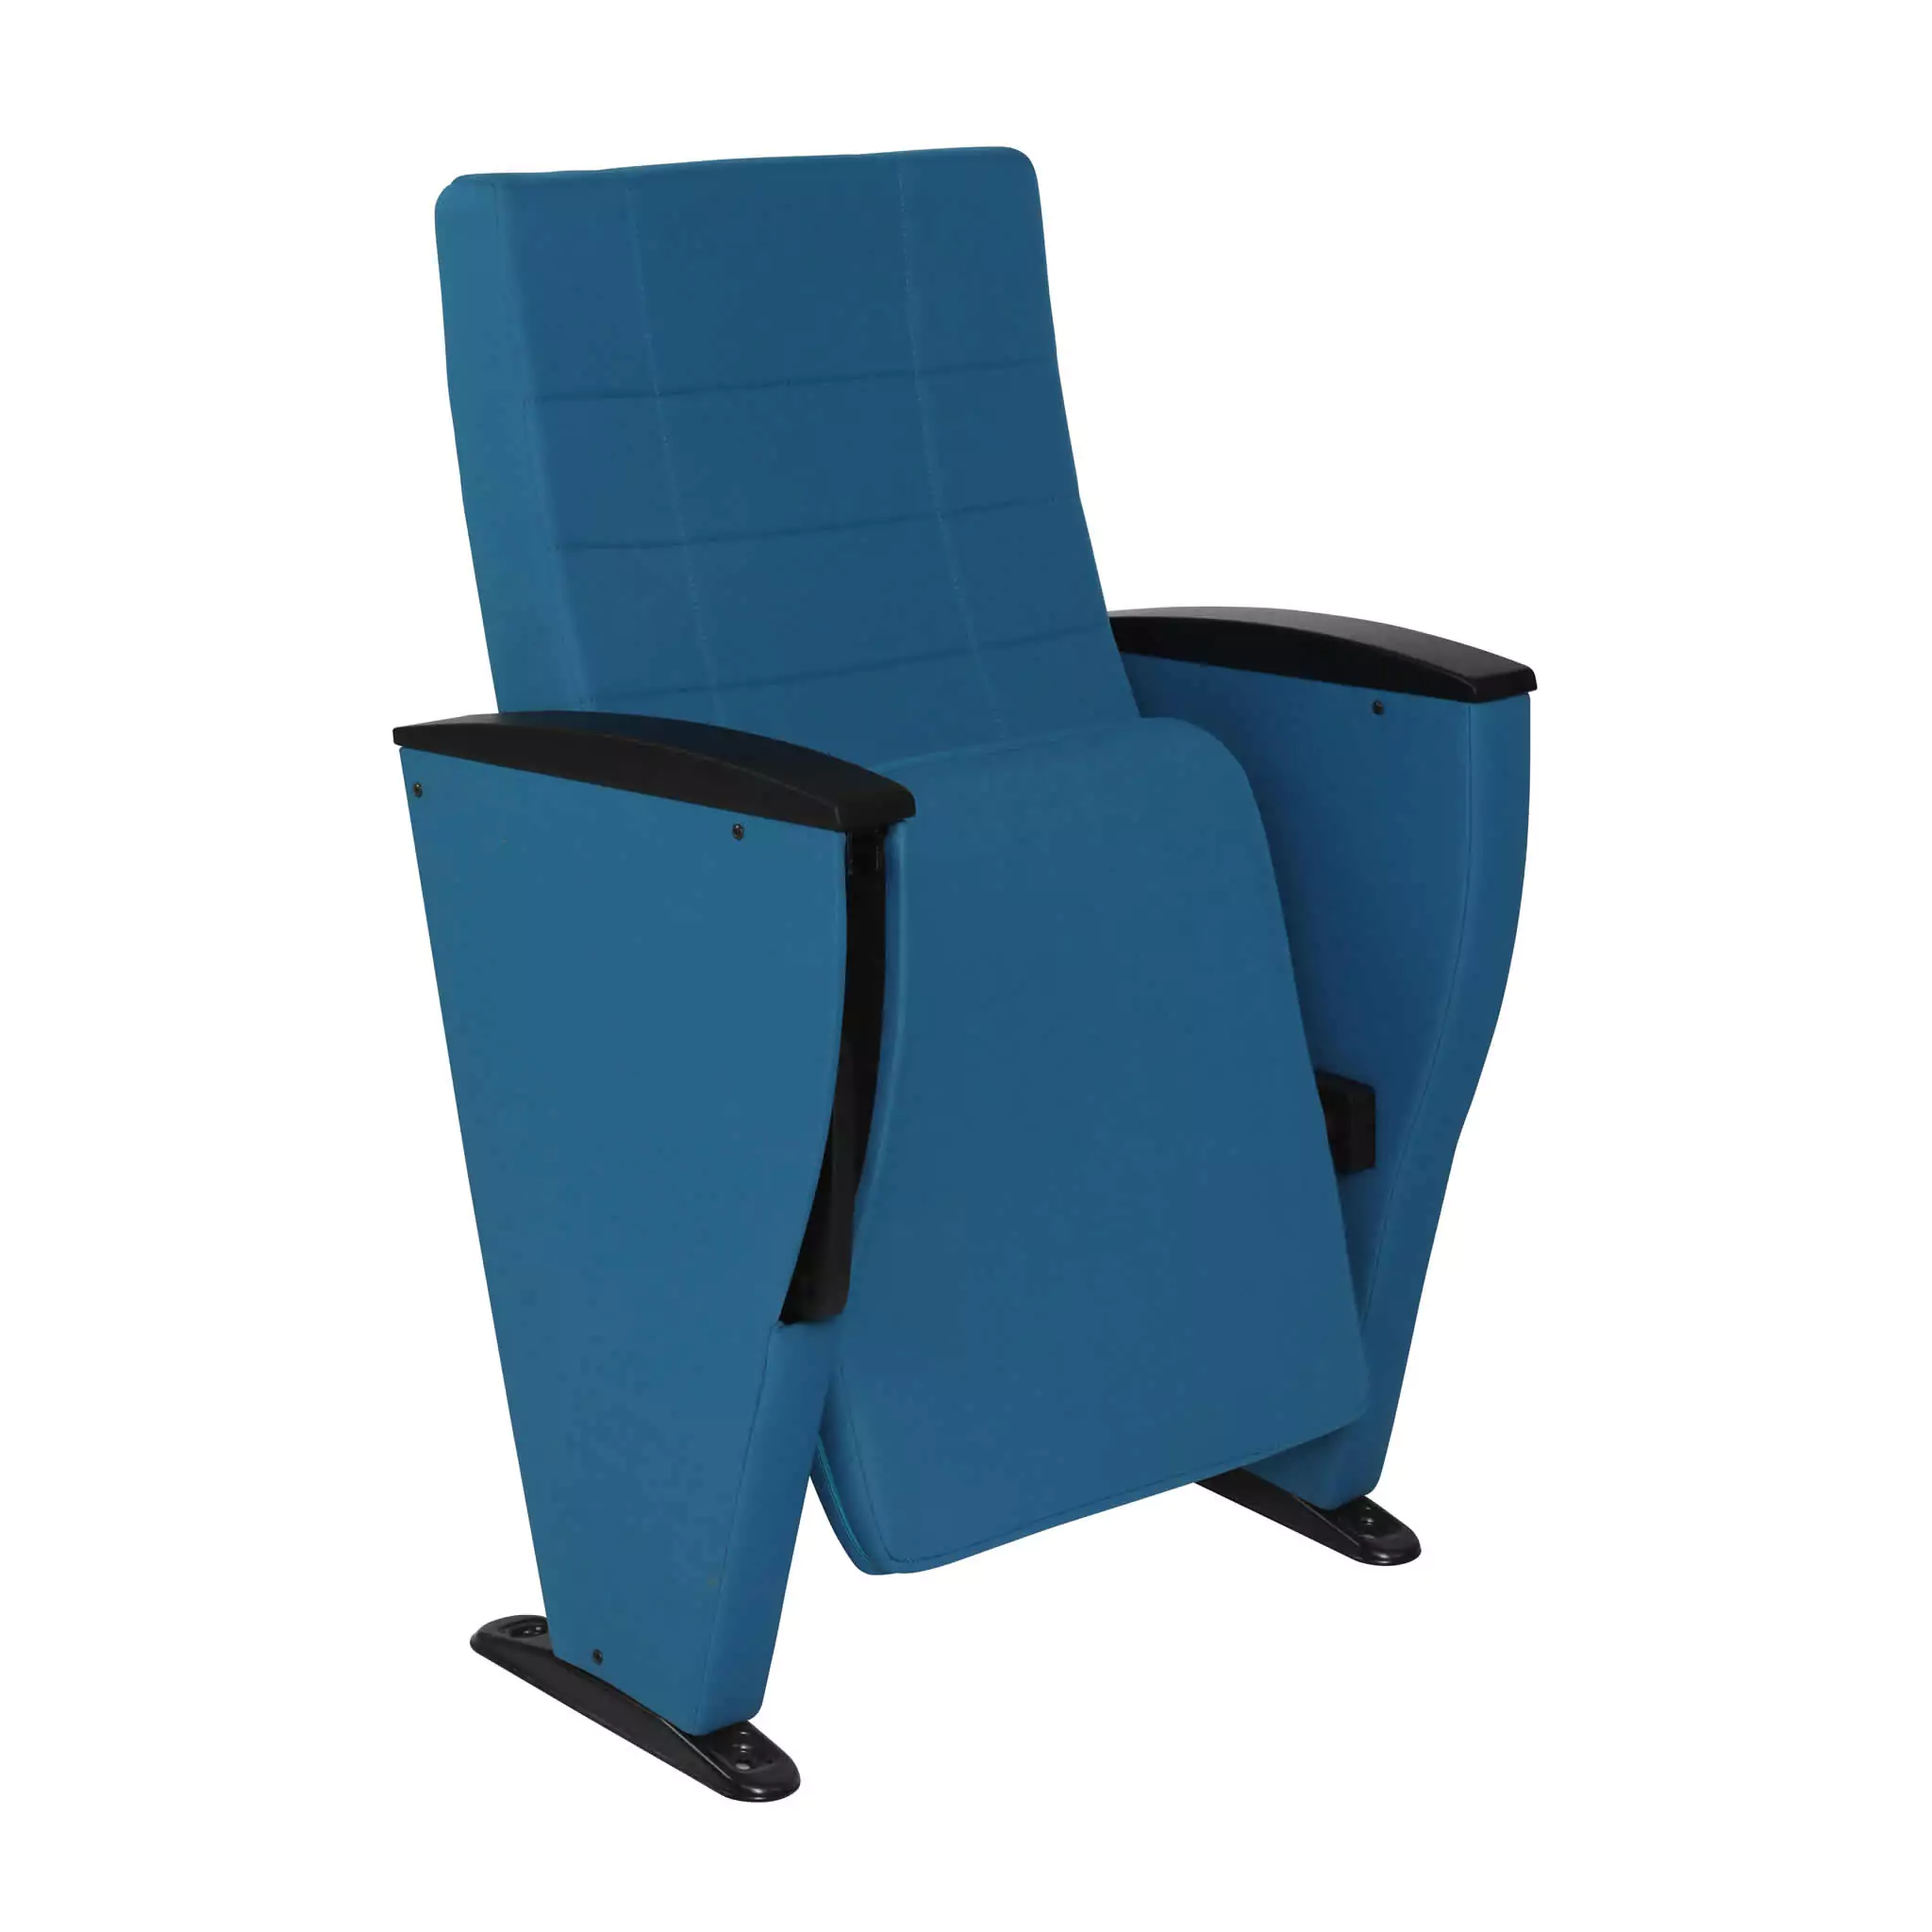 Simko Seating Product Conference Seat Safir AP 02